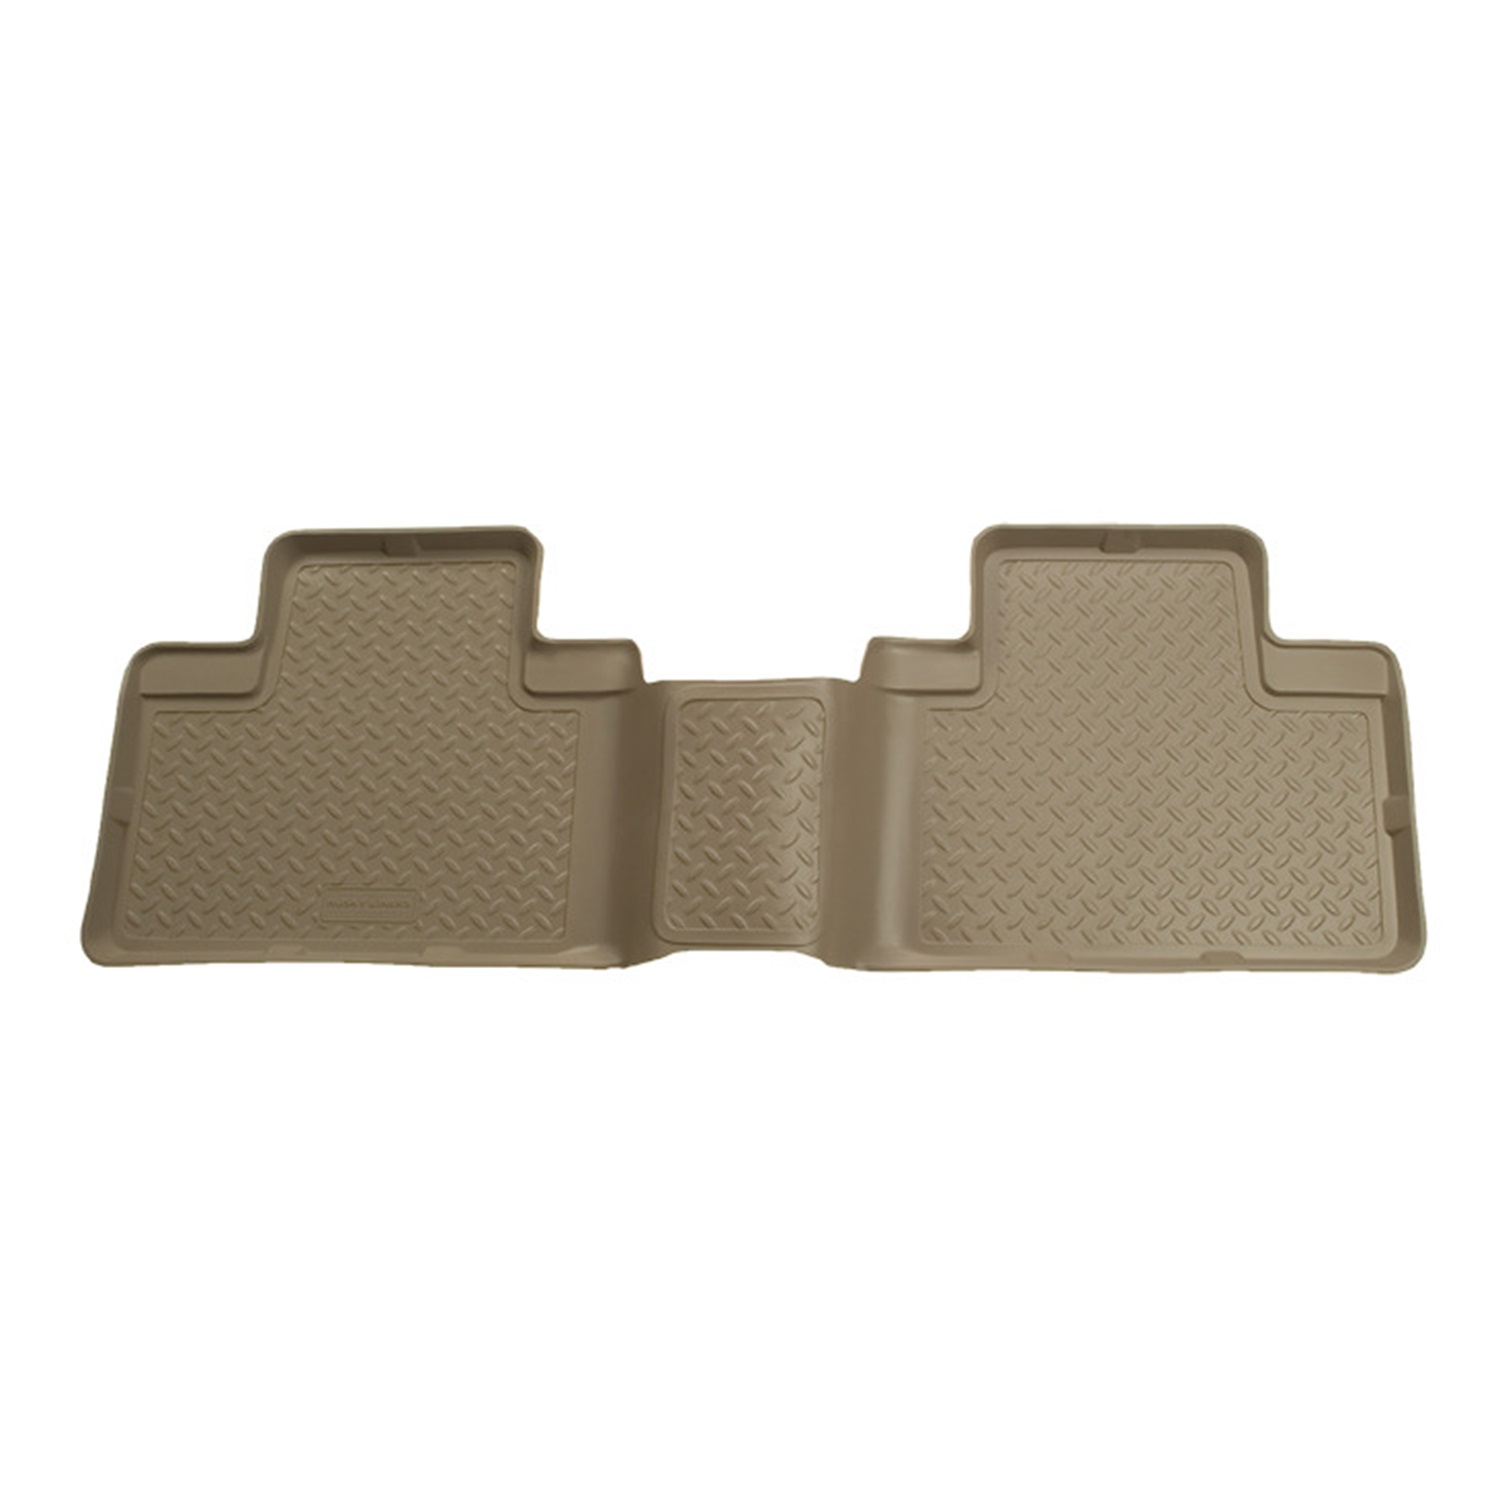 Husky Liners Husky Liners 65403 Classic Style; Floor Liner Fits 91-97 Land Cruiser LX450